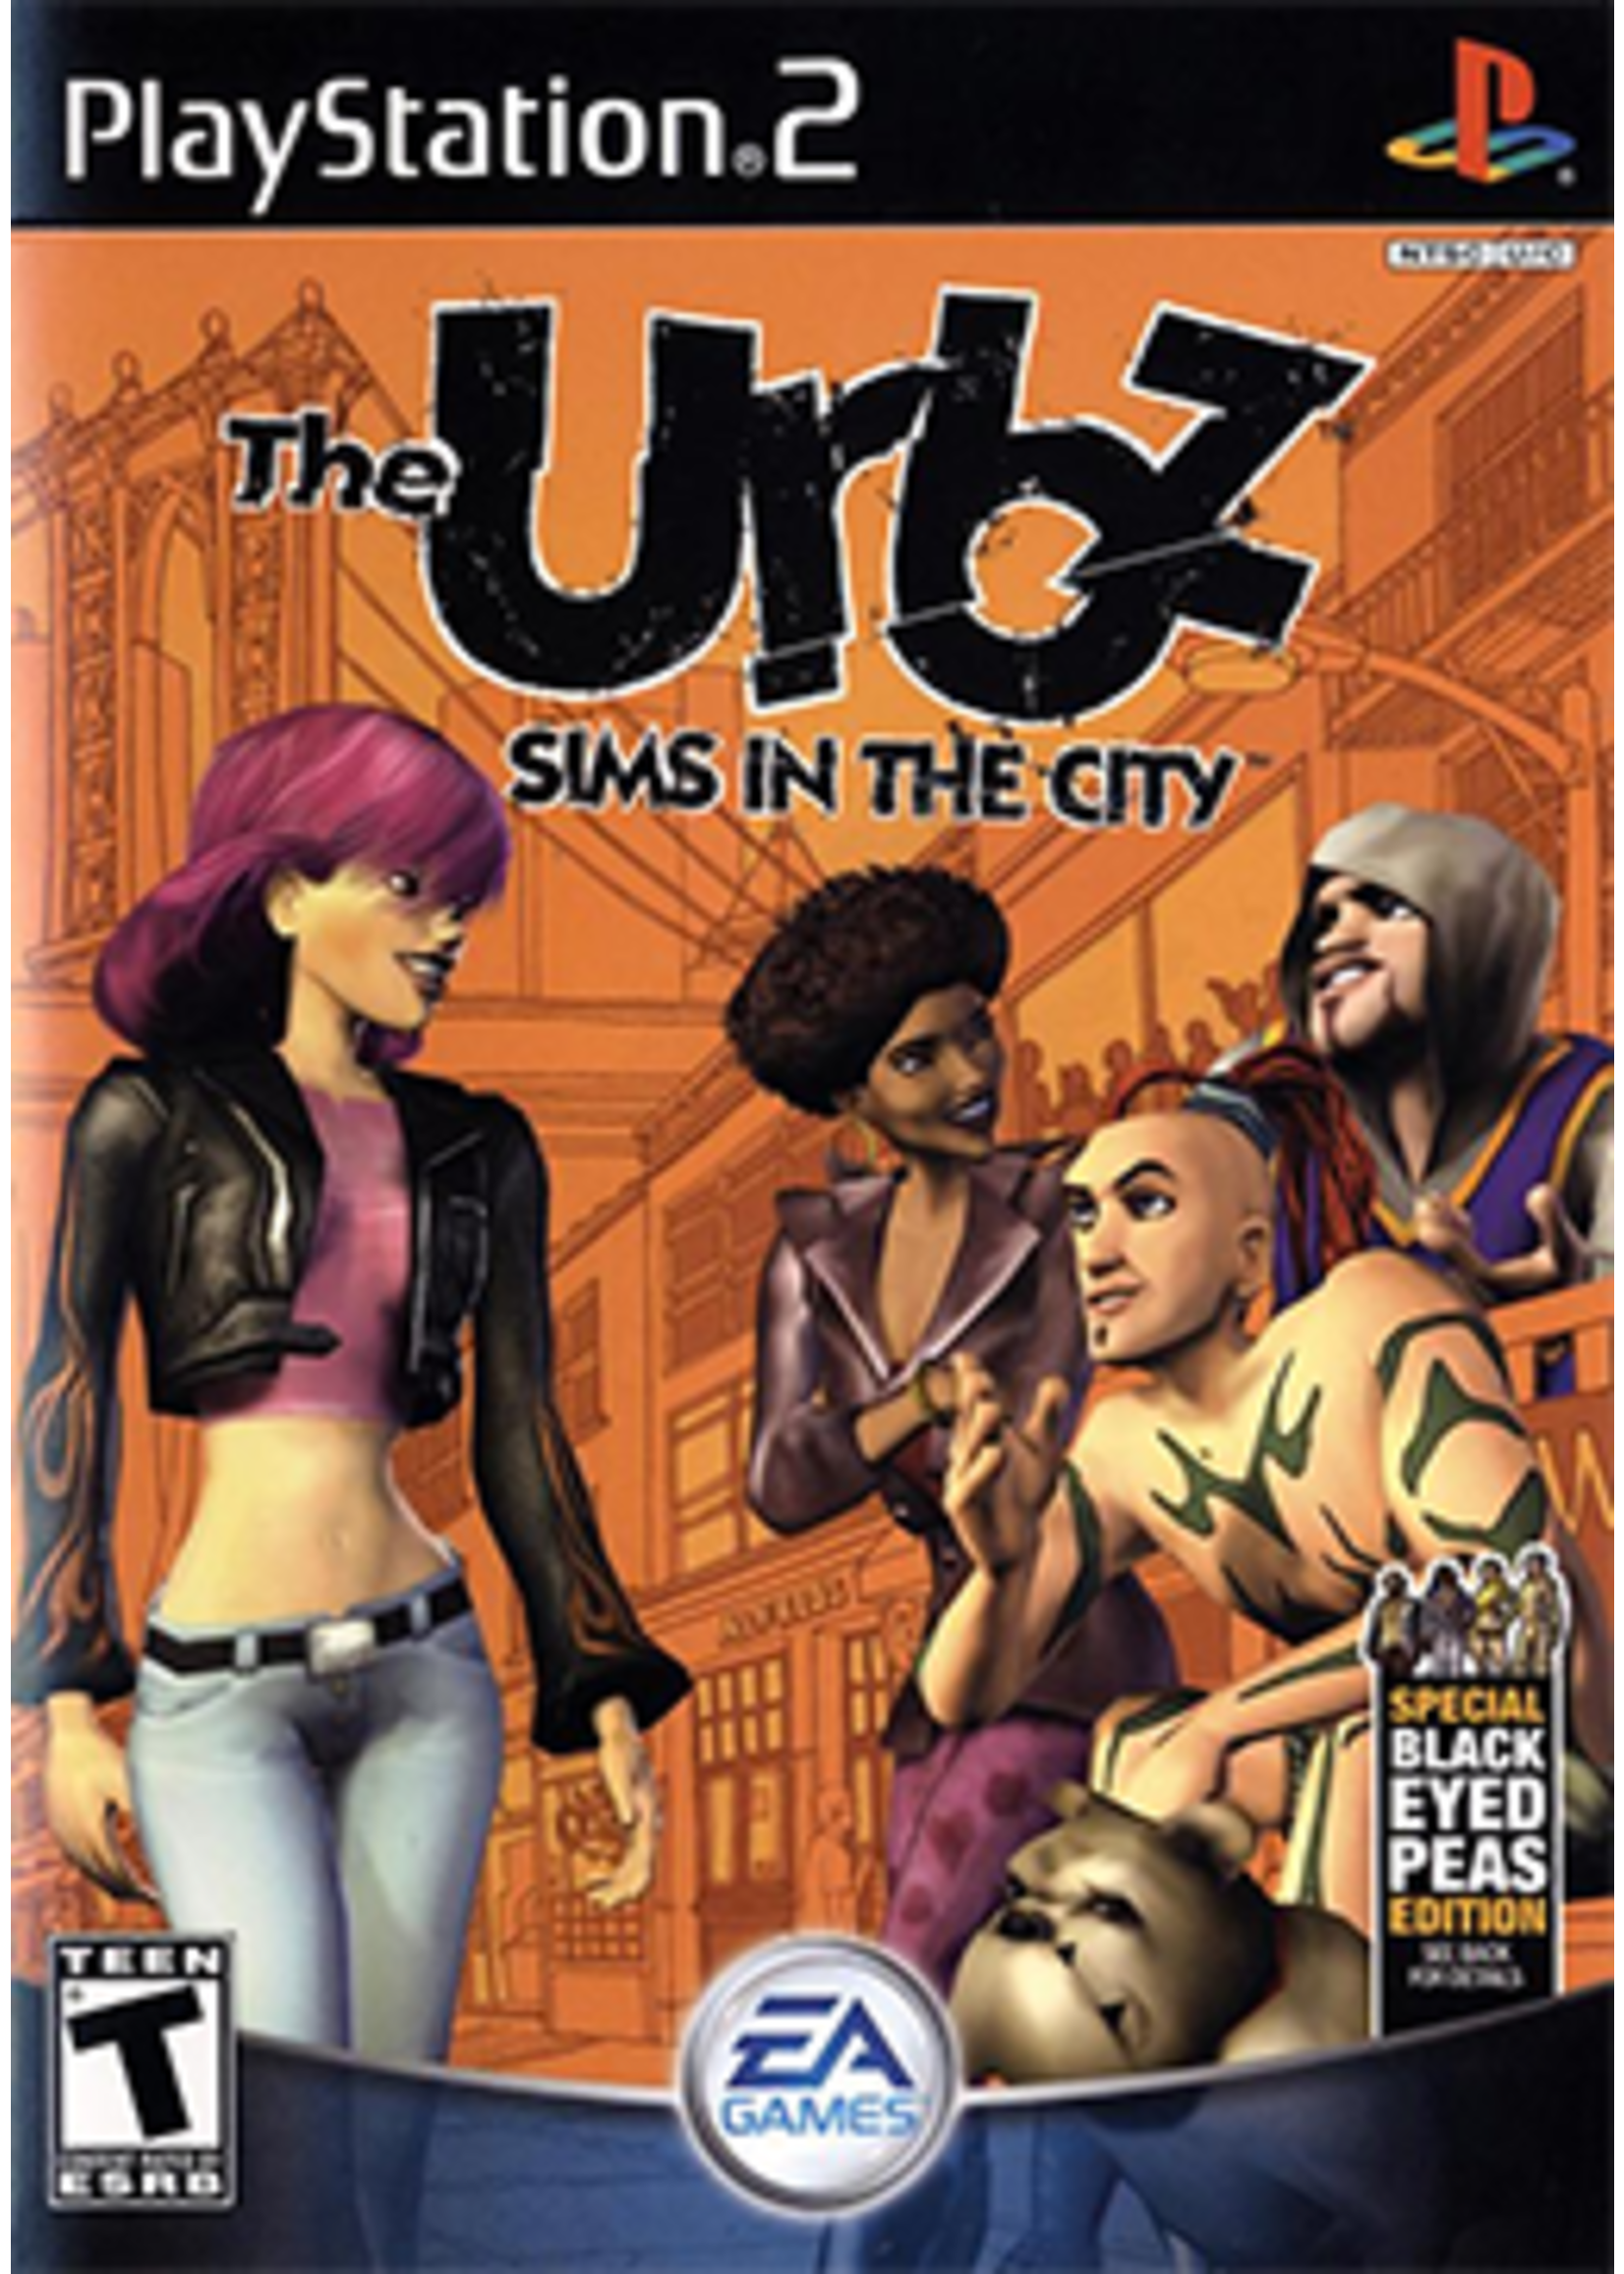 Sony Playstation 2 (PS2) Urbz Sims in the City, The